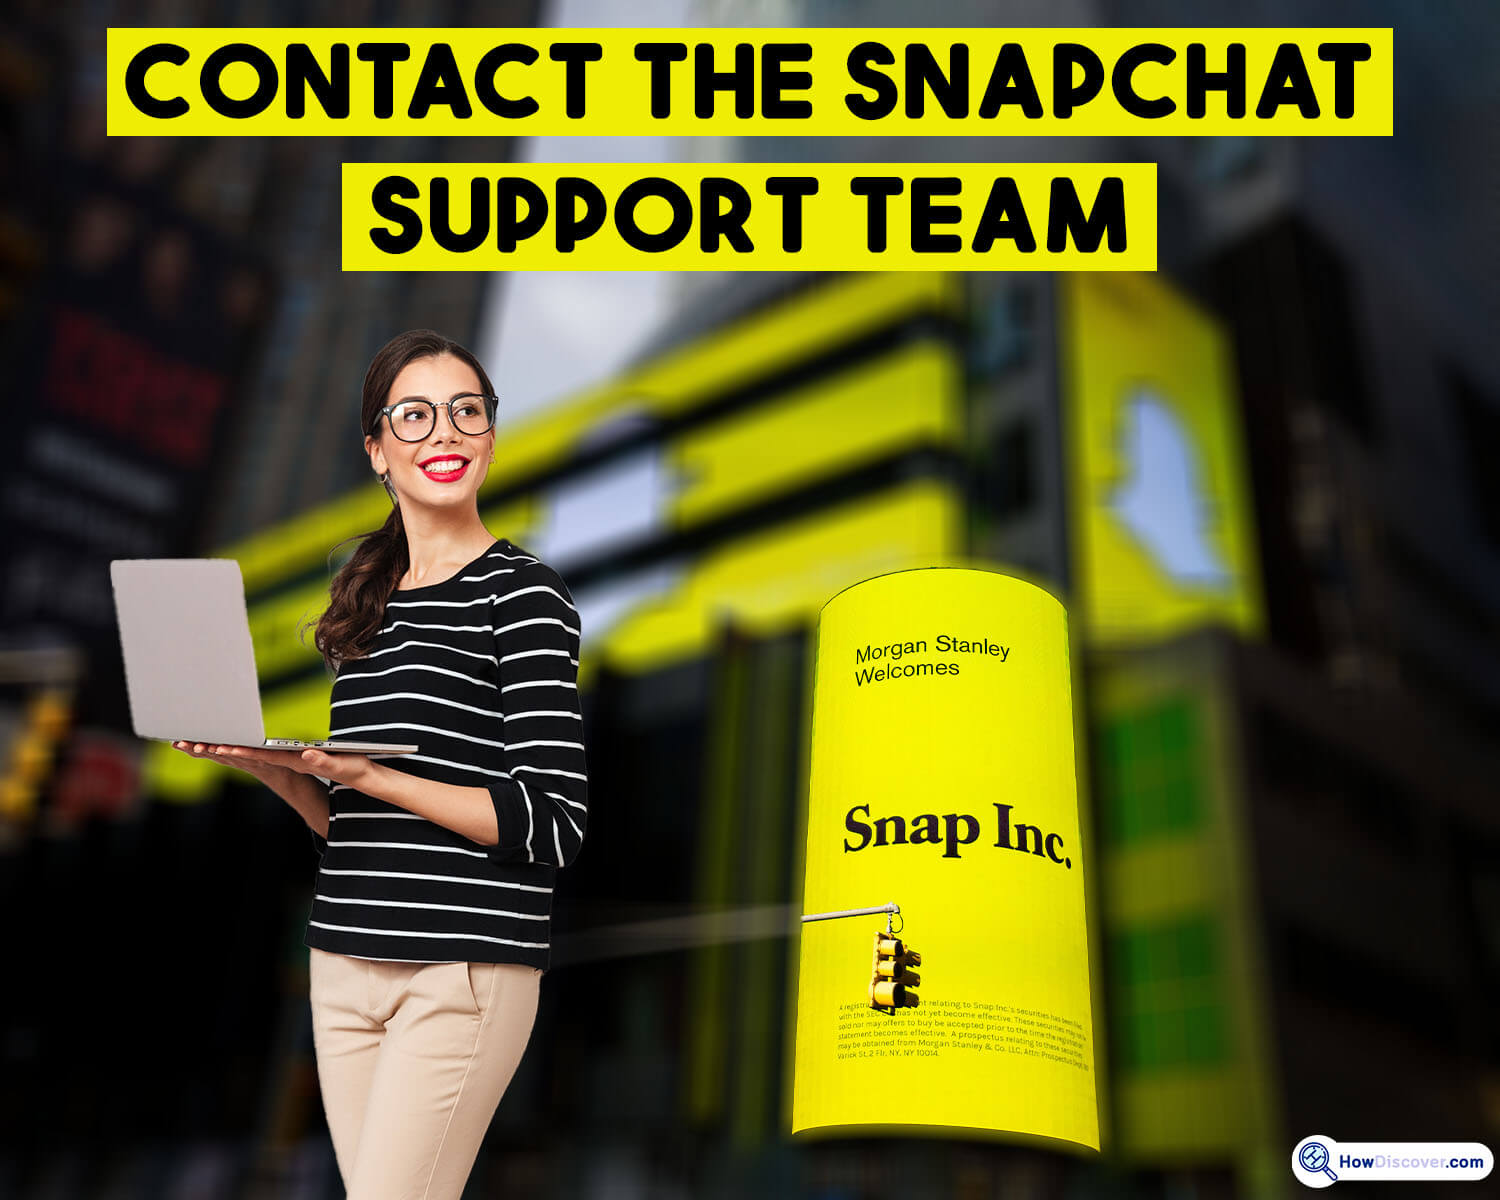 How To Email Snapchat Support Team